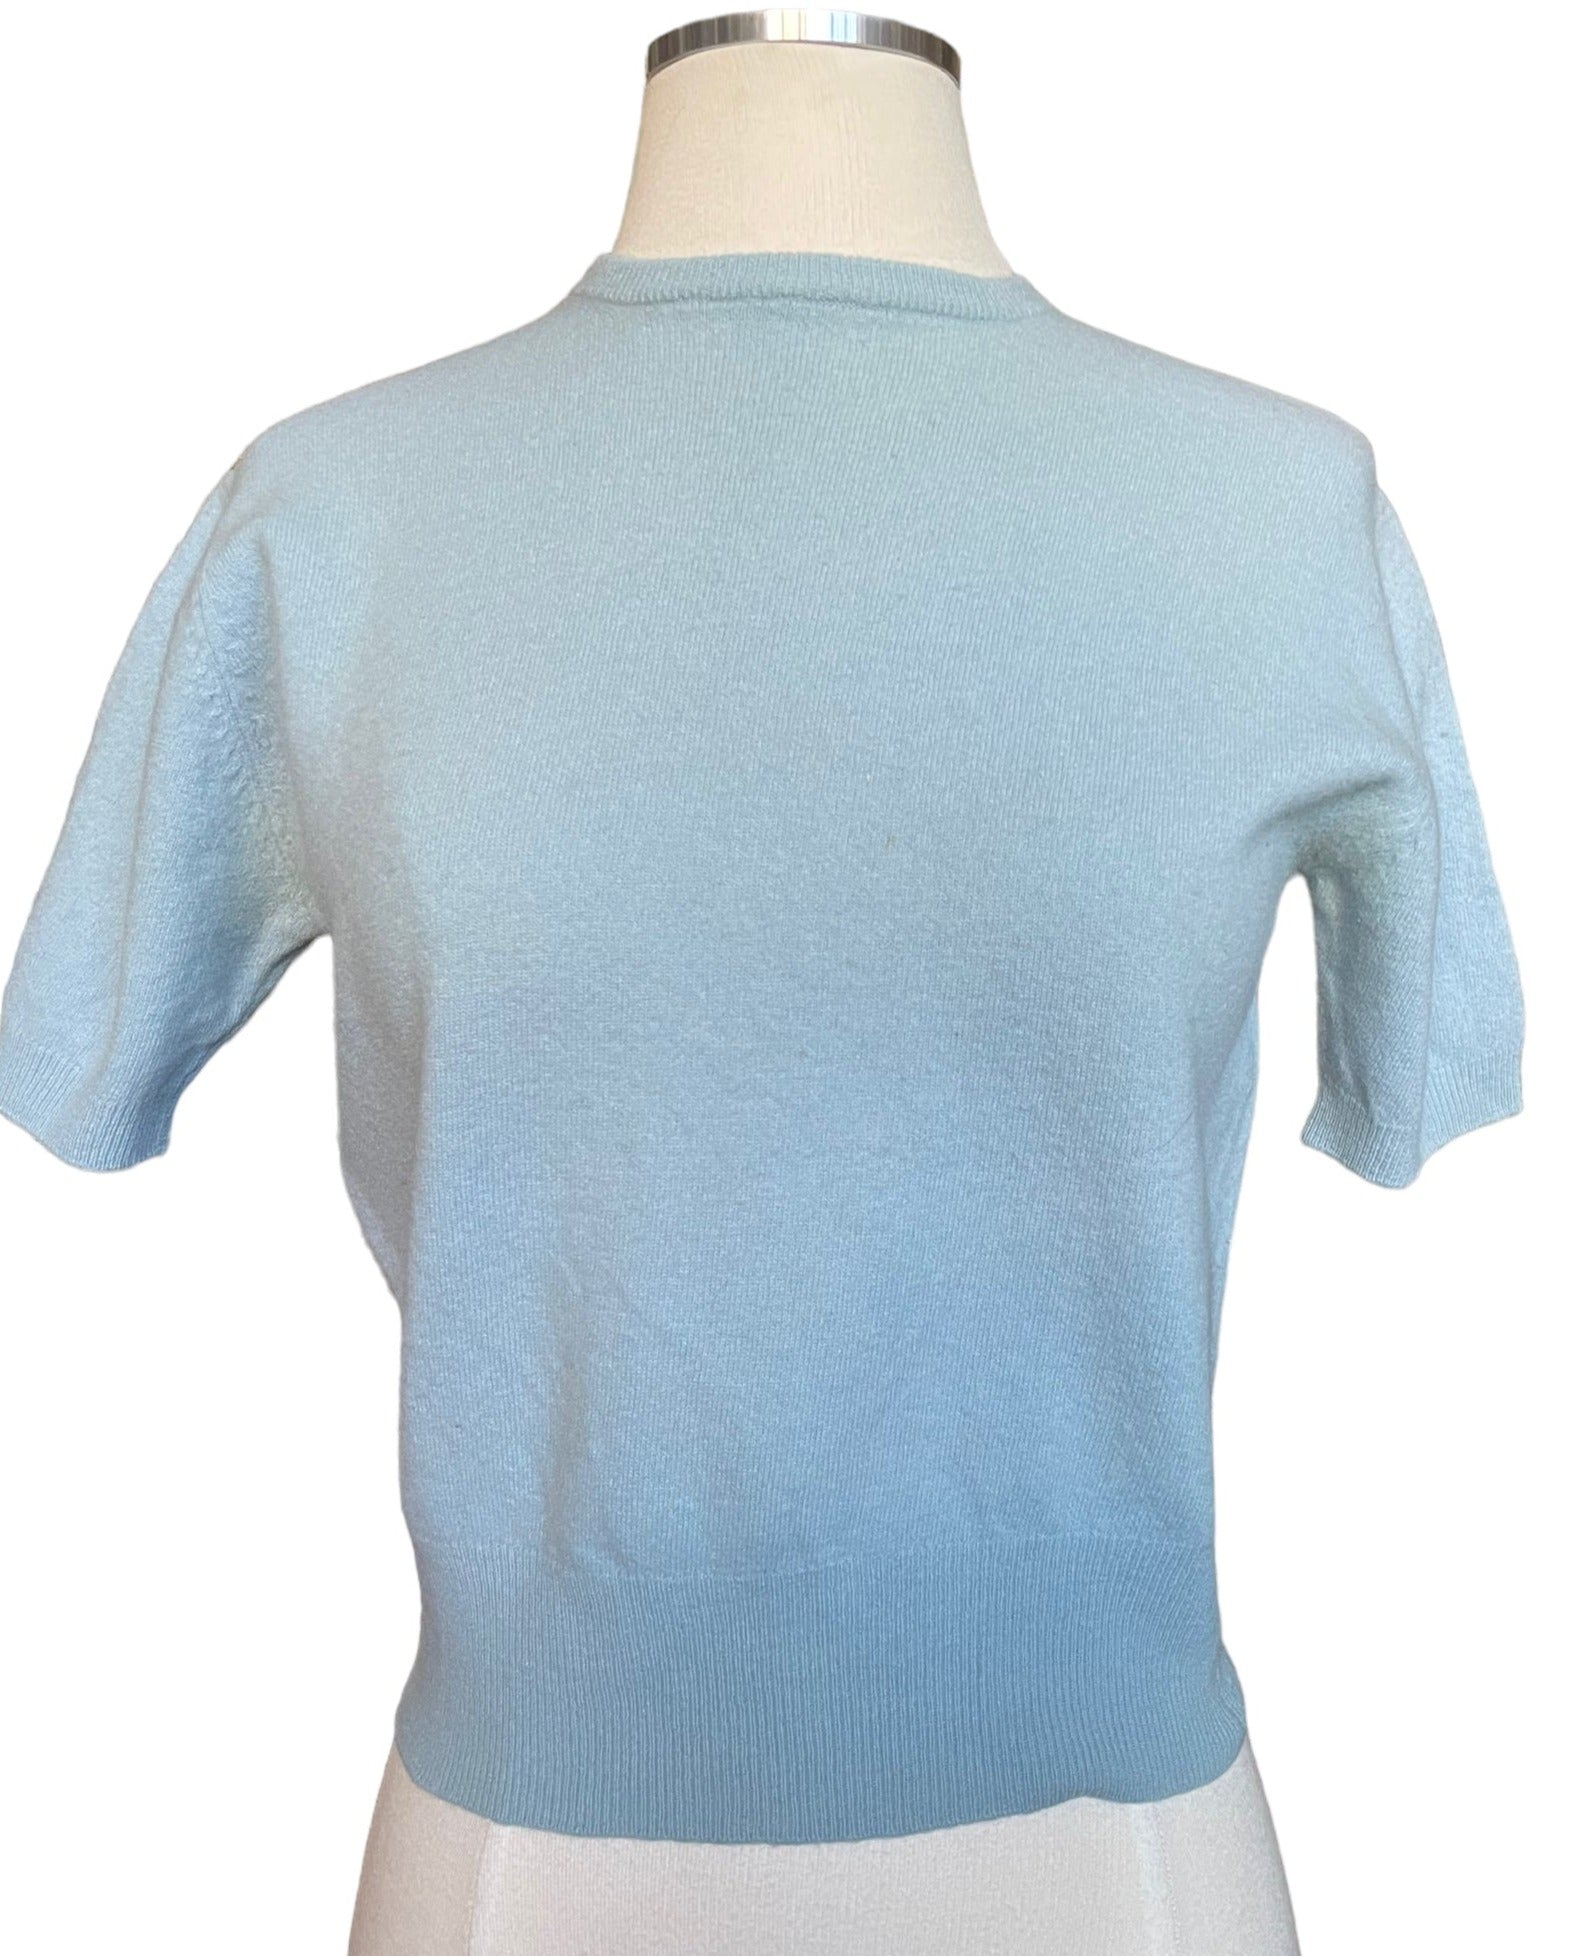 Full front view of Vintage 1950s Blue Short Sleeve Lamb's Wool Sweater | Seattle Vintage Sweaters | Barn Owl Vintage